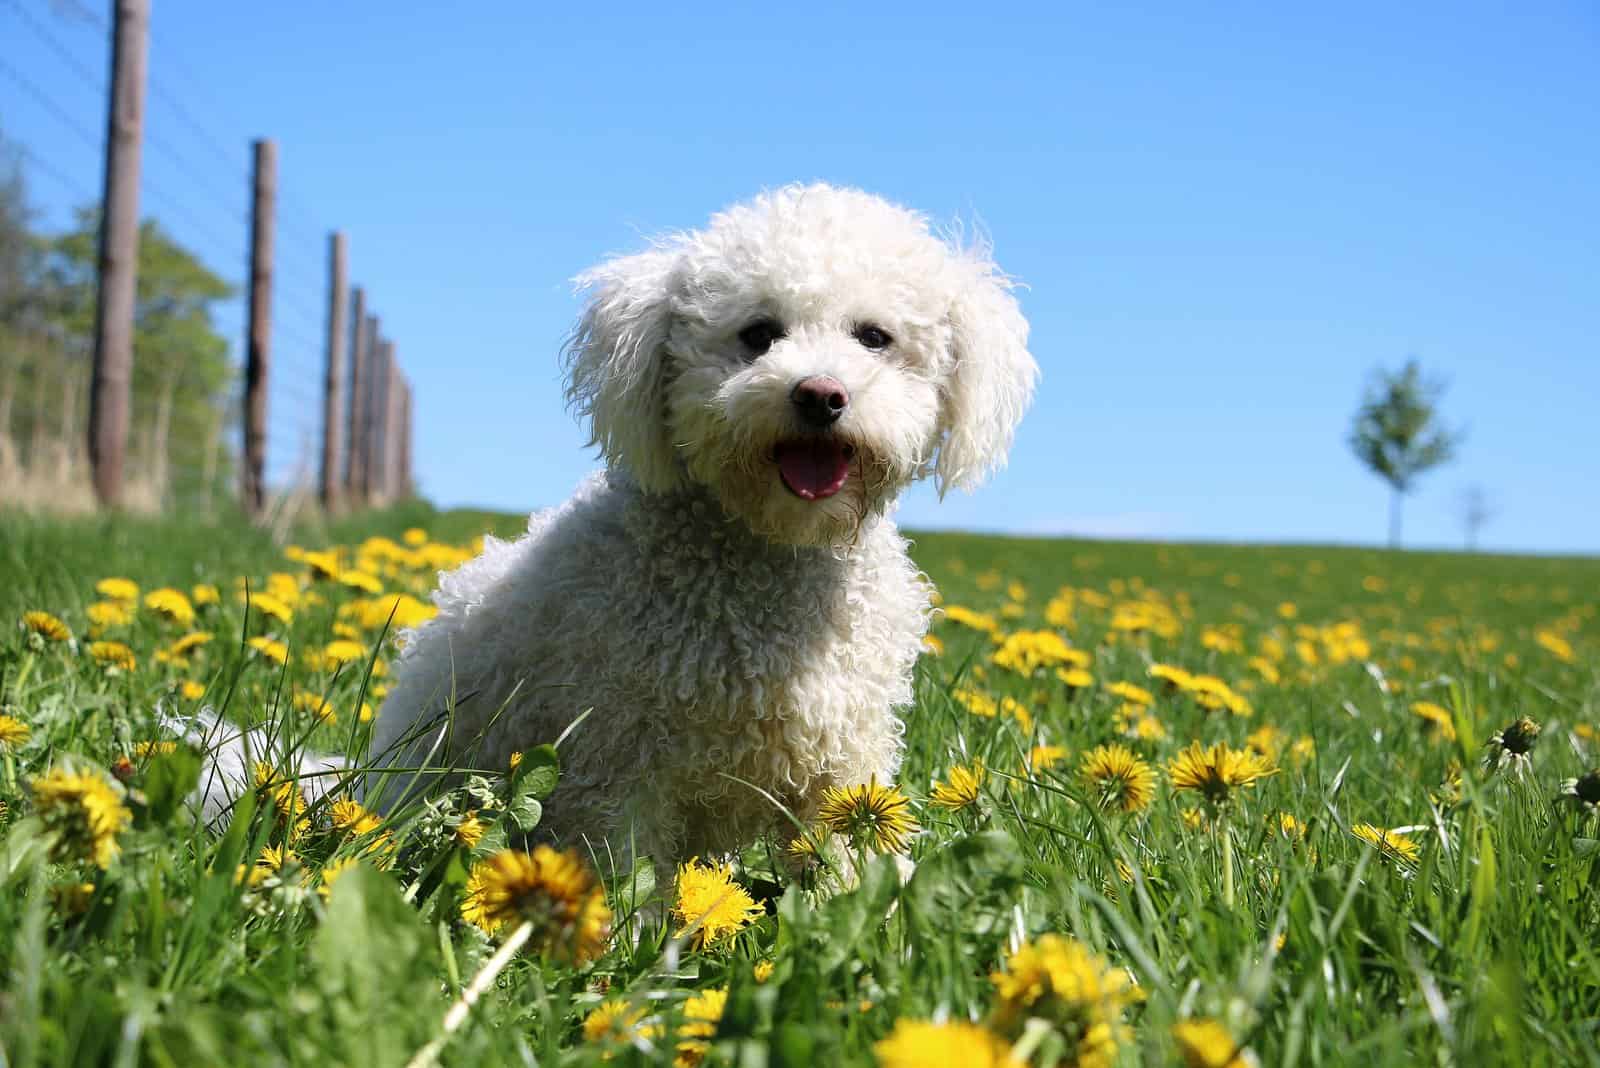 beautiful white poodle mixed dog is sitting in a field of dandelions